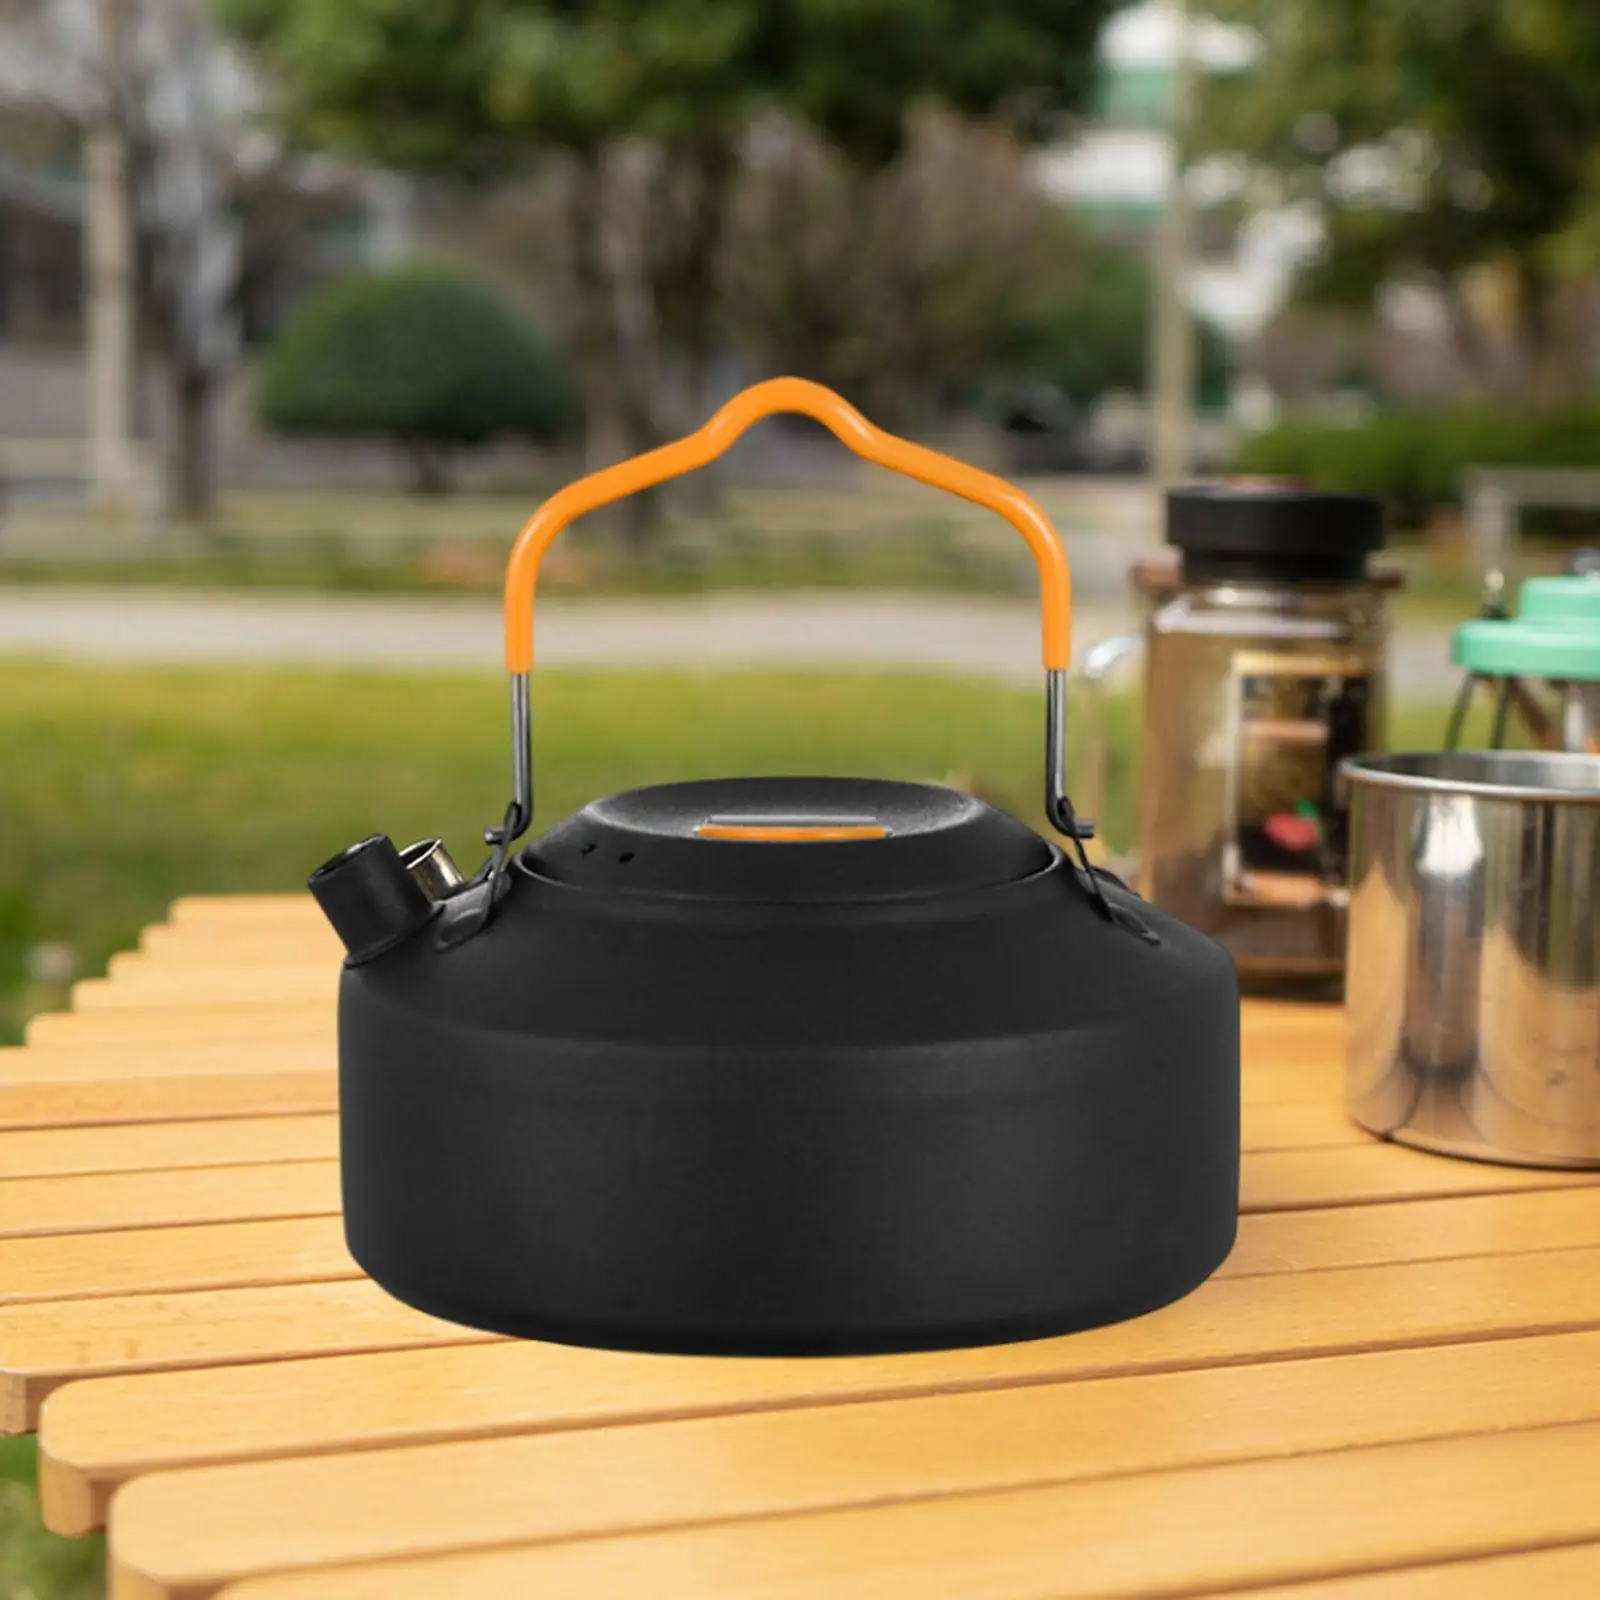 1L Camping Kettle Insulated Handle Teapot Stainless Steel Tea Kettle for Cooking Hiking Mountaineering Backpacking Travel